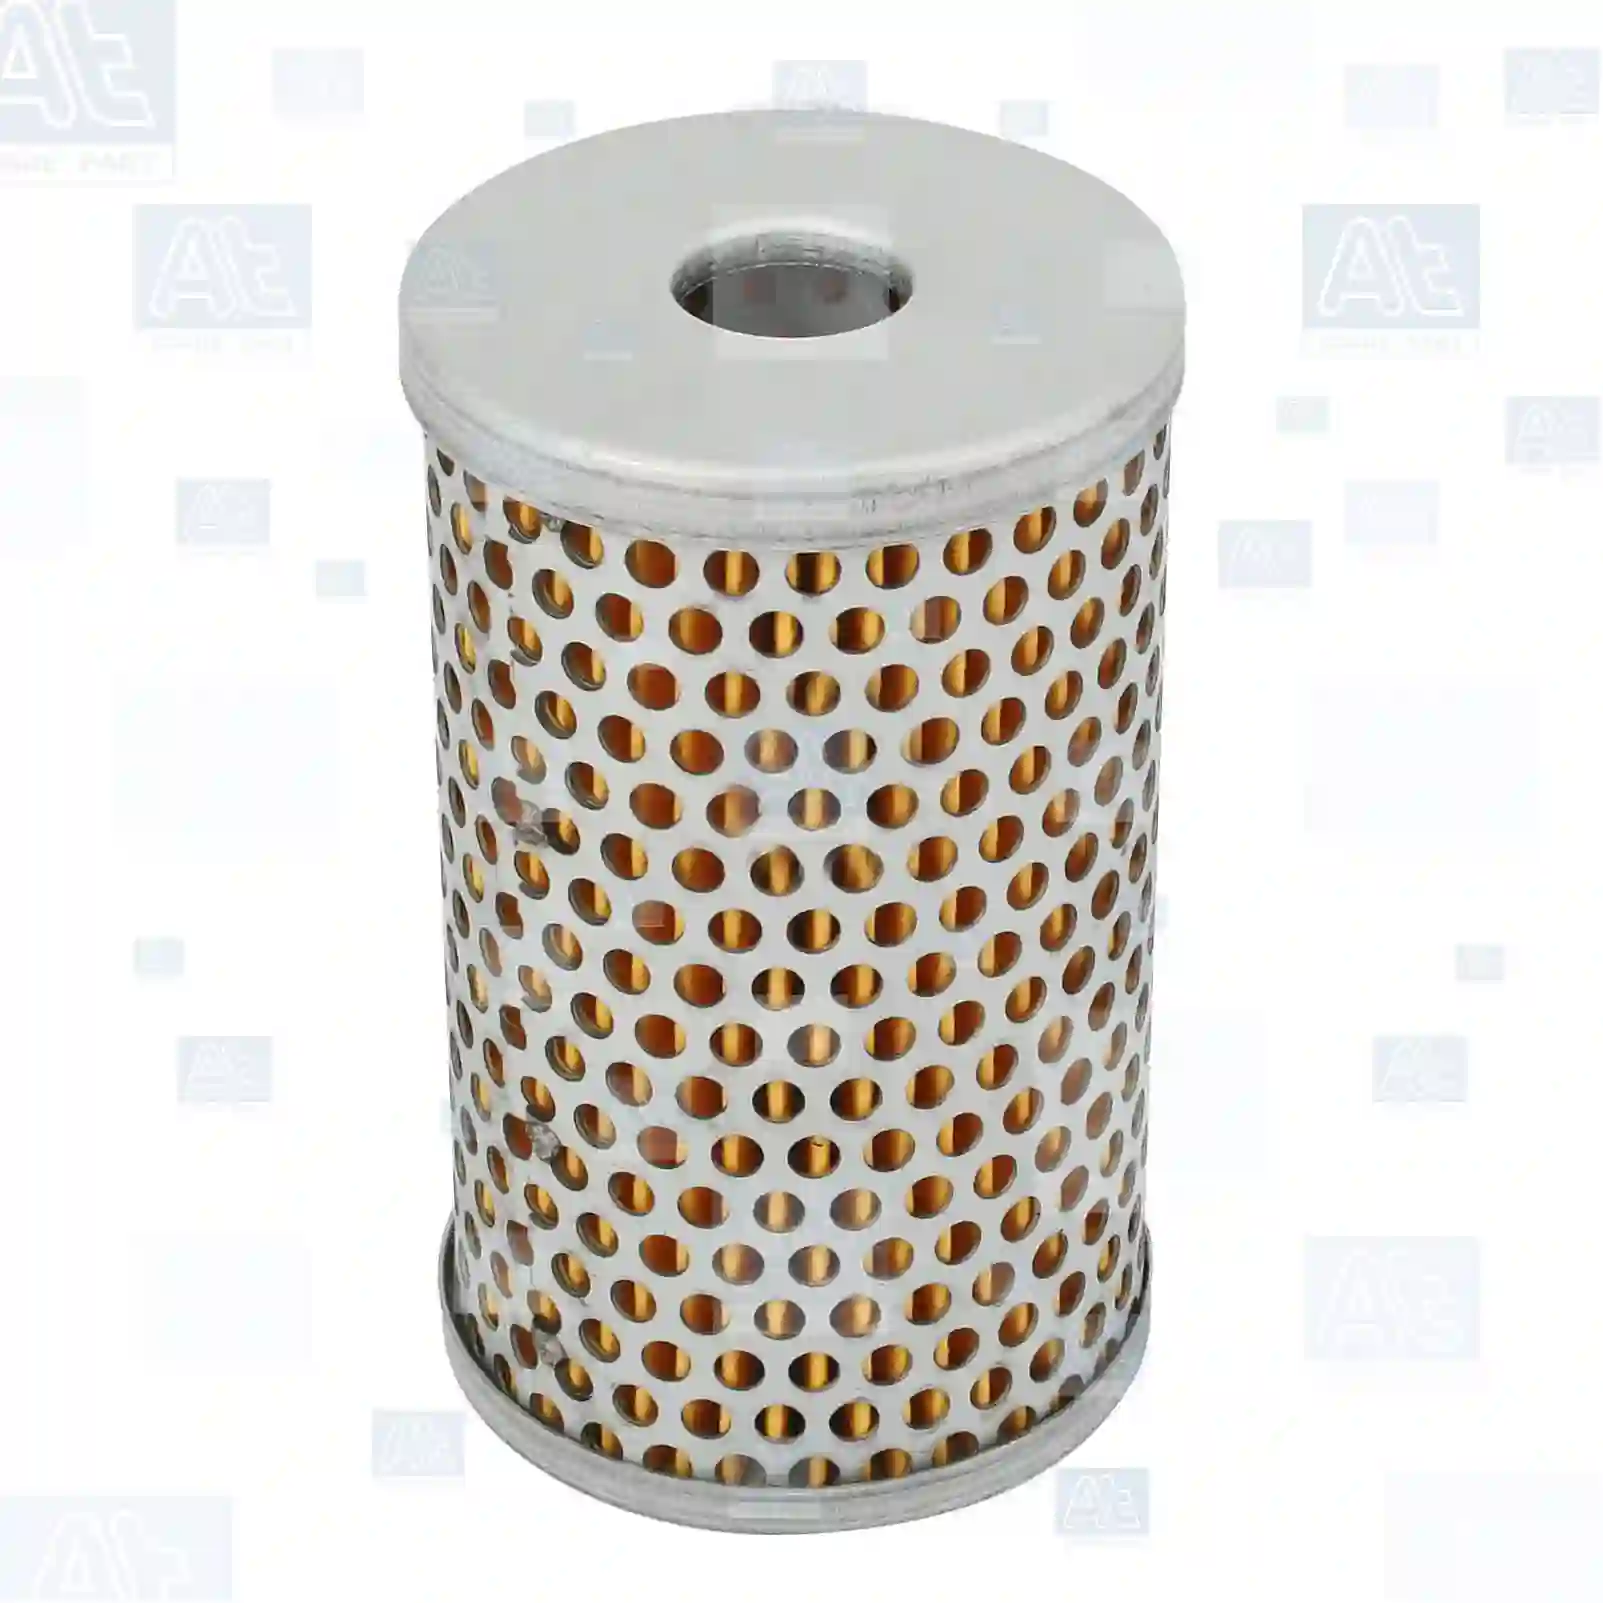 Oil filter insert, at no 77705048, oem no: 01902137, 02966261, T11145397, 0004662804, 0661135, 0661160, 11420661132, 11420661135, 11420661160, 11421256260, 11429061088, 11507423009, 11507425104, 32411120717, 11842225, 1842225, 1844901, 4660204, 4660604, 0229348, 1500663, 2293248, 229348, 491810, 7632141111, 905480, BBU5866, 02966251, 02966261, 2680500218, 00269661, 01902137, 02696621, 02966251, 02966261, 09914553, 42559501, 45481348, 5000674, 5000675, 5000676, 5011425, 5012553, OG0000084646, 5577966, 7984959, 9975217, 5577966, 7984260, 7984959, 93156615, 97094732, 2889829M91, 371912793, 04045601, 00966261, 01268424, 01902137, 01908082, 02696621, 02966251, 02966261, 09914553, 1902137, 2966261, 42553041, 42559501, 503120251, 5000820895, 5001018962, 02966251, 02966261, 81473016005, 81473070008, 85400003330, 2889829, 2889829M91, 0000940404, 0001184225, 0001842225, 0001842325, 0001844701, 0001844901, 0001845801, 0001846301, 0001846525, 0004660204, 0004660404, 0004660604, 0004662804, 0004663004, 0011842225, 0021841125, 1021800109, 1021840425, 8225000030, 8225000232, 013200300, 5000814407, 5000820895, 5001871595, 5021107375, 6005019563, 6005019804, 7400349619, 7420580233, 7421392404, 8499135552, HD604, 00119590, 1343242, 153465, 153468, 1953094, 8225000030, 8225000232, 1296311510, 1696311510, 5104504020, 480A4700748, 480A470060, 480A470748, 5011070580, 216230, 632114112, 15856180, 20580233, 21392404, 349619, 3496191, 3496197, 6612098, 7349619, 85103870, 2V5422384A, 400700504, T11145397, ZG03044-0008 At Spare Part | Engine, Accelerator Pedal, Camshaft, Connecting Rod, Crankcase, Crankshaft, Cylinder Head, Engine Suspension Mountings, Exhaust Manifold, Exhaust Gas Recirculation, Filter Kits, Flywheel Housing, General Overhaul Kits, Engine, Intake Manifold, Oil Cleaner, Oil Cooler, Oil Filter, Oil Pump, Oil Sump, Piston & Liner, Sensor & Switch, Timing Case, Turbocharger, Cooling System, Belt Tensioner, Coolant Filter, Coolant Pipe, Corrosion Prevention Agent, Drive, Expansion Tank, Fan, Intercooler, Monitors & Gauges, Radiator, Thermostat, V-Belt / Timing belt, Water Pump, Fuel System, Electronical Injector Unit, Feed Pump, Fuel Filter, cpl., Fuel Gauge Sender,  Fuel Line, Fuel Pump, Fuel Tank, Injection Line Kit, Injection Pump, Exhaust System, Clutch & Pedal, Gearbox, Propeller Shaft, Axles, Brake System, Hubs & Wheels, Suspension, Leaf Spring, Universal Parts / Accessories, Steering, Electrical System, Cabin Oil filter insert, at no 77705048, oem no: 01902137, 02966261, T11145397, 0004662804, 0661135, 0661160, 11420661132, 11420661135, 11420661160, 11421256260, 11429061088, 11507423009, 11507425104, 32411120717, 11842225, 1842225, 1844901, 4660204, 4660604, 0229348, 1500663, 2293248, 229348, 491810, 7632141111, 905480, BBU5866, 02966251, 02966261, 2680500218, 00269661, 01902137, 02696621, 02966251, 02966261, 09914553, 42559501, 45481348, 5000674, 5000675, 5000676, 5011425, 5012553, OG0000084646, 5577966, 7984959, 9975217, 5577966, 7984260, 7984959, 93156615, 97094732, 2889829M91, 371912793, 04045601, 00966261, 01268424, 01902137, 01908082, 02696621, 02966251, 02966261, 09914553, 1902137, 2966261, 42553041, 42559501, 503120251, 5000820895, 5001018962, 02966251, 02966261, 81473016005, 81473070008, 85400003330, 2889829, 2889829M91, 0000940404, 0001184225, 0001842225, 0001842325, 0001844701, 0001844901, 0001845801, 0001846301, 0001846525, 0004660204, 0004660404, 0004660604, 0004662804, 0004663004, 0011842225, 0021841125, 1021800109, 1021840425, 8225000030, 8225000232, 013200300, 5000814407, 5000820895, 5001871595, 5021107375, 6005019563, 6005019804, 7400349619, 7420580233, 7421392404, 8499135552, HD604, 00119590, 1343242, 153465, 153468, 1953094, 8225000030, 8225000232, 1296311510, 1696311510, 5104504020, 480A4700748, 480A470060, 480A470748, 5011070580, 216230, 632114112, 15856180, 20580233, 21392404, 349619, 3496191, 3496197, 6612098, 7349619, 85103870, 2V5422384A, 400700504, T11145397, ZG03044-0008 At Spare Part | Engine, Accelerator Pedal, Camshaft, Connecting Rod, Crankcase, Crankshaft, Cylinder Head, Engine Suspension Mountings, Exhaust Manifold, Exhaust Gas Recirculation, Filter Kits, Flywheel Housing, General Overhaul Kits, Engine, Intake Manifold, Oil Cleaner, Oil Cooler, Oil Filter, Oil Pump, Oil Sump, Piston & Liner, Sensor & Switch, Timing Case, Turbocharger, Cooling System, Belt Tensioner, Coolant Filter, Coolant Pipe, Corrosion Prevention Agent, Drive, Expansion Tank, Fan, Intercooler, Monitors & Gauges, Radiator, Thermostat, V-Belt / Timing belt, Water Pump, Fuel System, Electronical Injector Unit, Feed Pump, Fuel Filter, cpl., Fuel Gauge Sender,  Fuel Line, Fuel Pump, Fuel Tank, Injection Line Kit, Injection Pump, Exhaust System, Clutch & Pedal, Gearbox, Propeller Shaft, Axles, Brake System, Hubs & Wheels, Suspension, Leaf Spring, Universal Parts / Accessories, Steering, Electrical System, Cabin